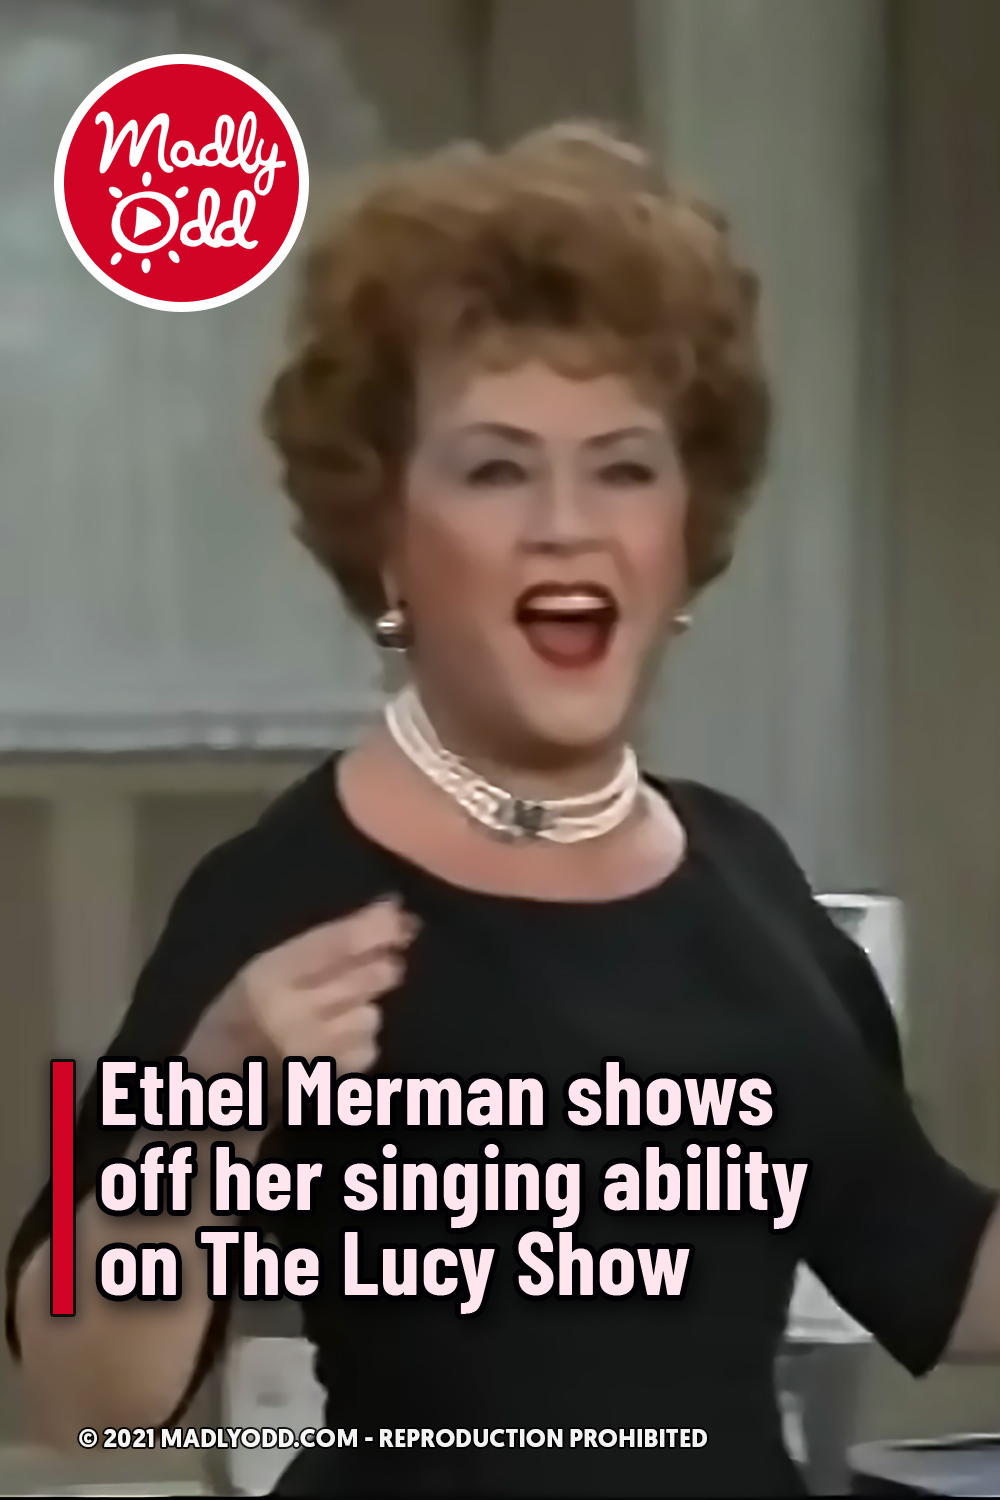 Ethel Merman shows off her singing ability on The Lucy Show